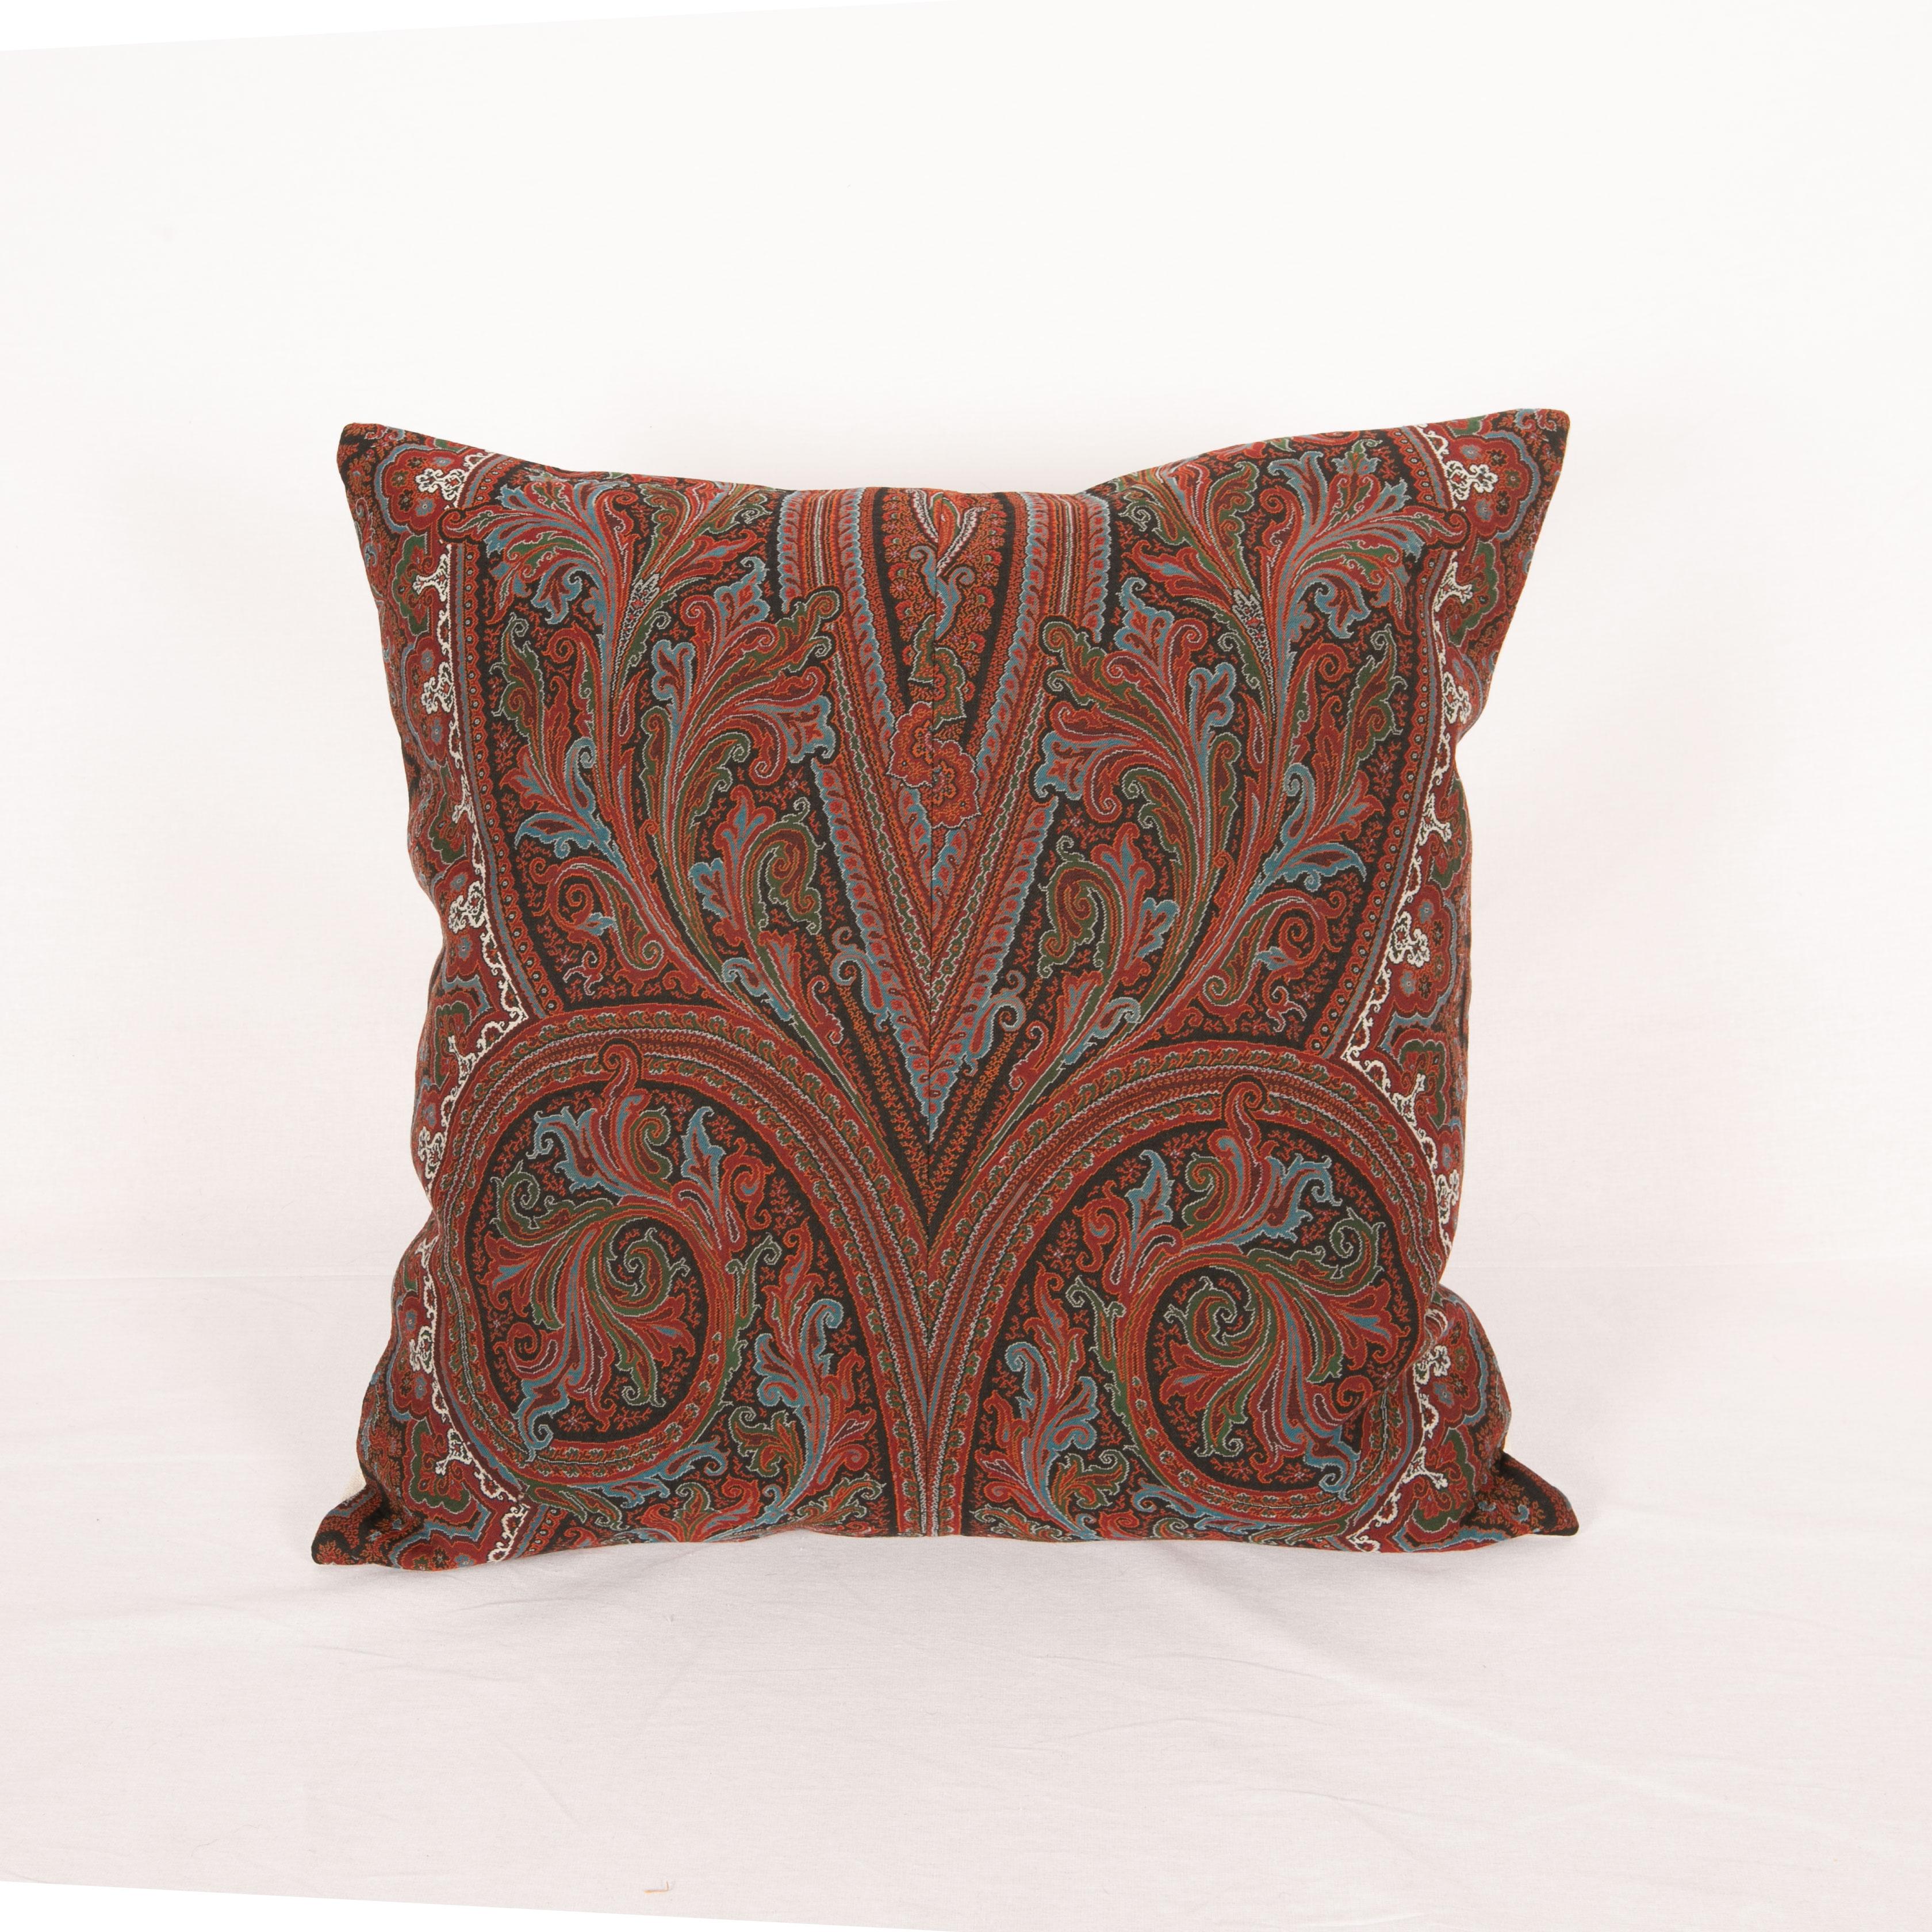 Pillow case is made from a European Paisley Shawl.
It does not come with an insert .
Linen in the back.
Zipper closure
Dry clean is recommended.